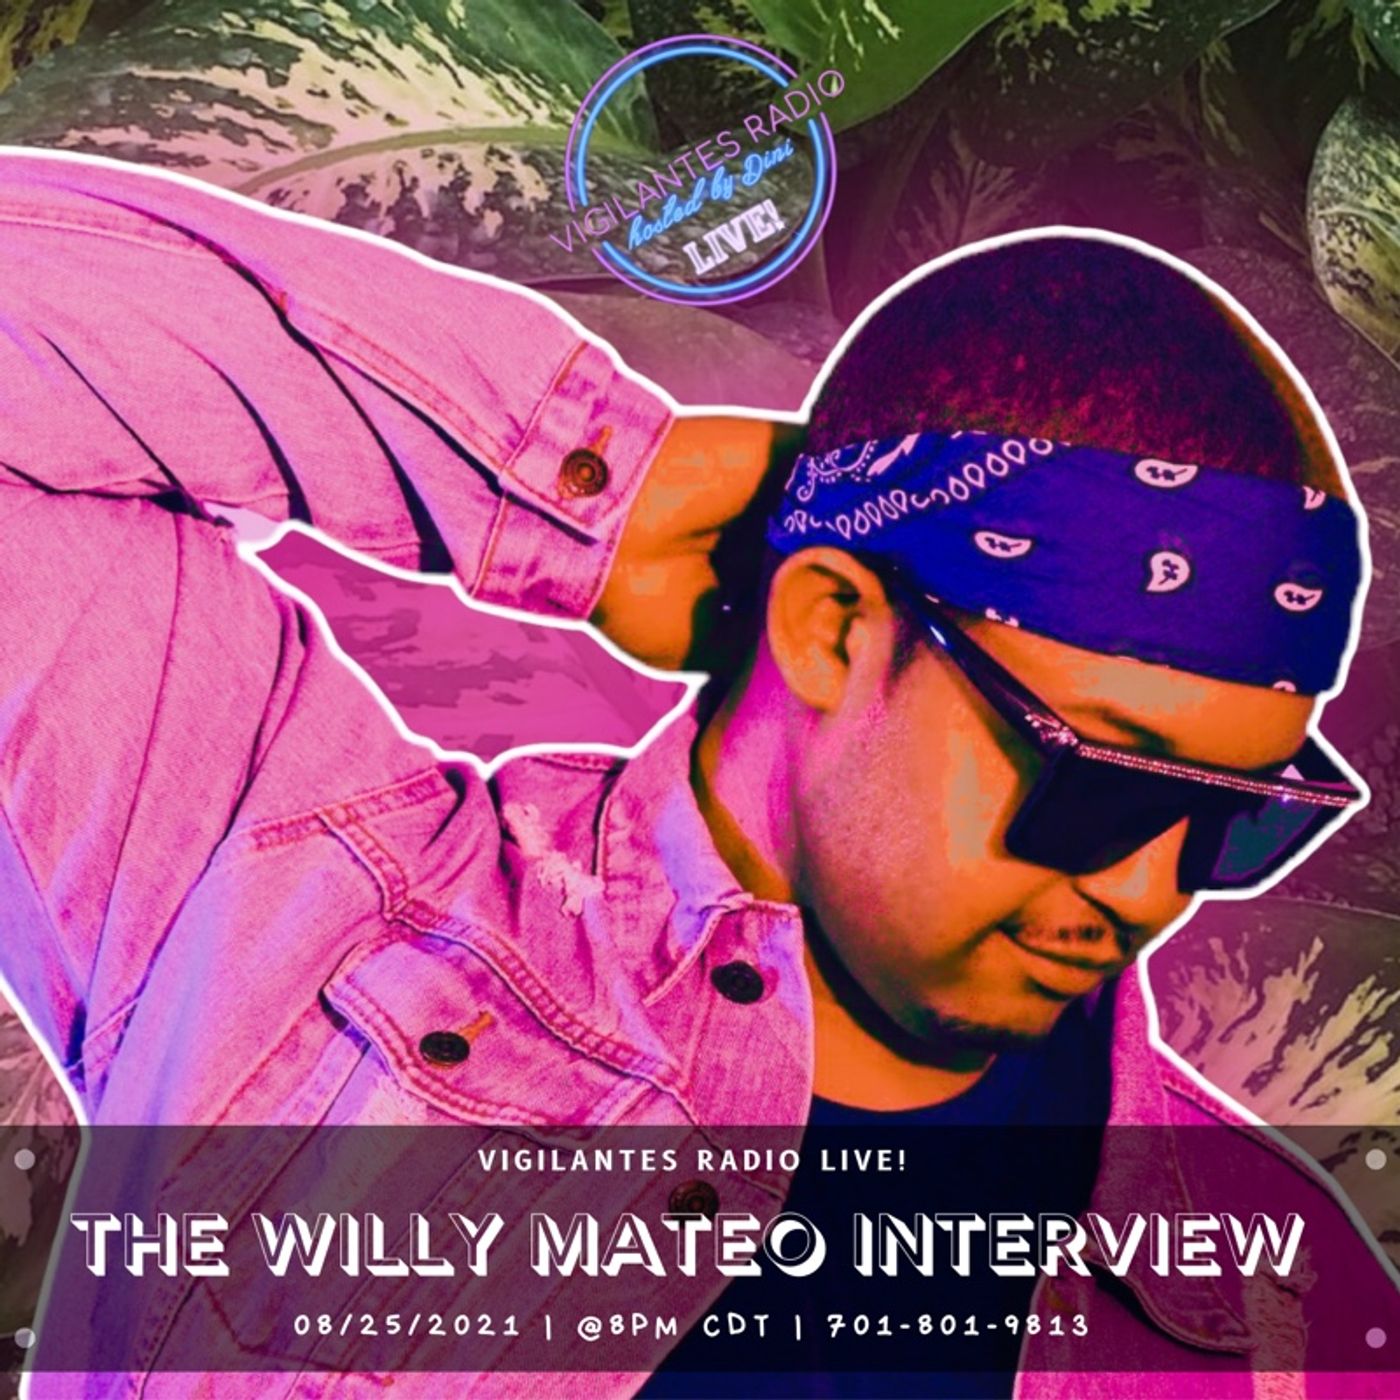 The Willie Mateo Interview. Image